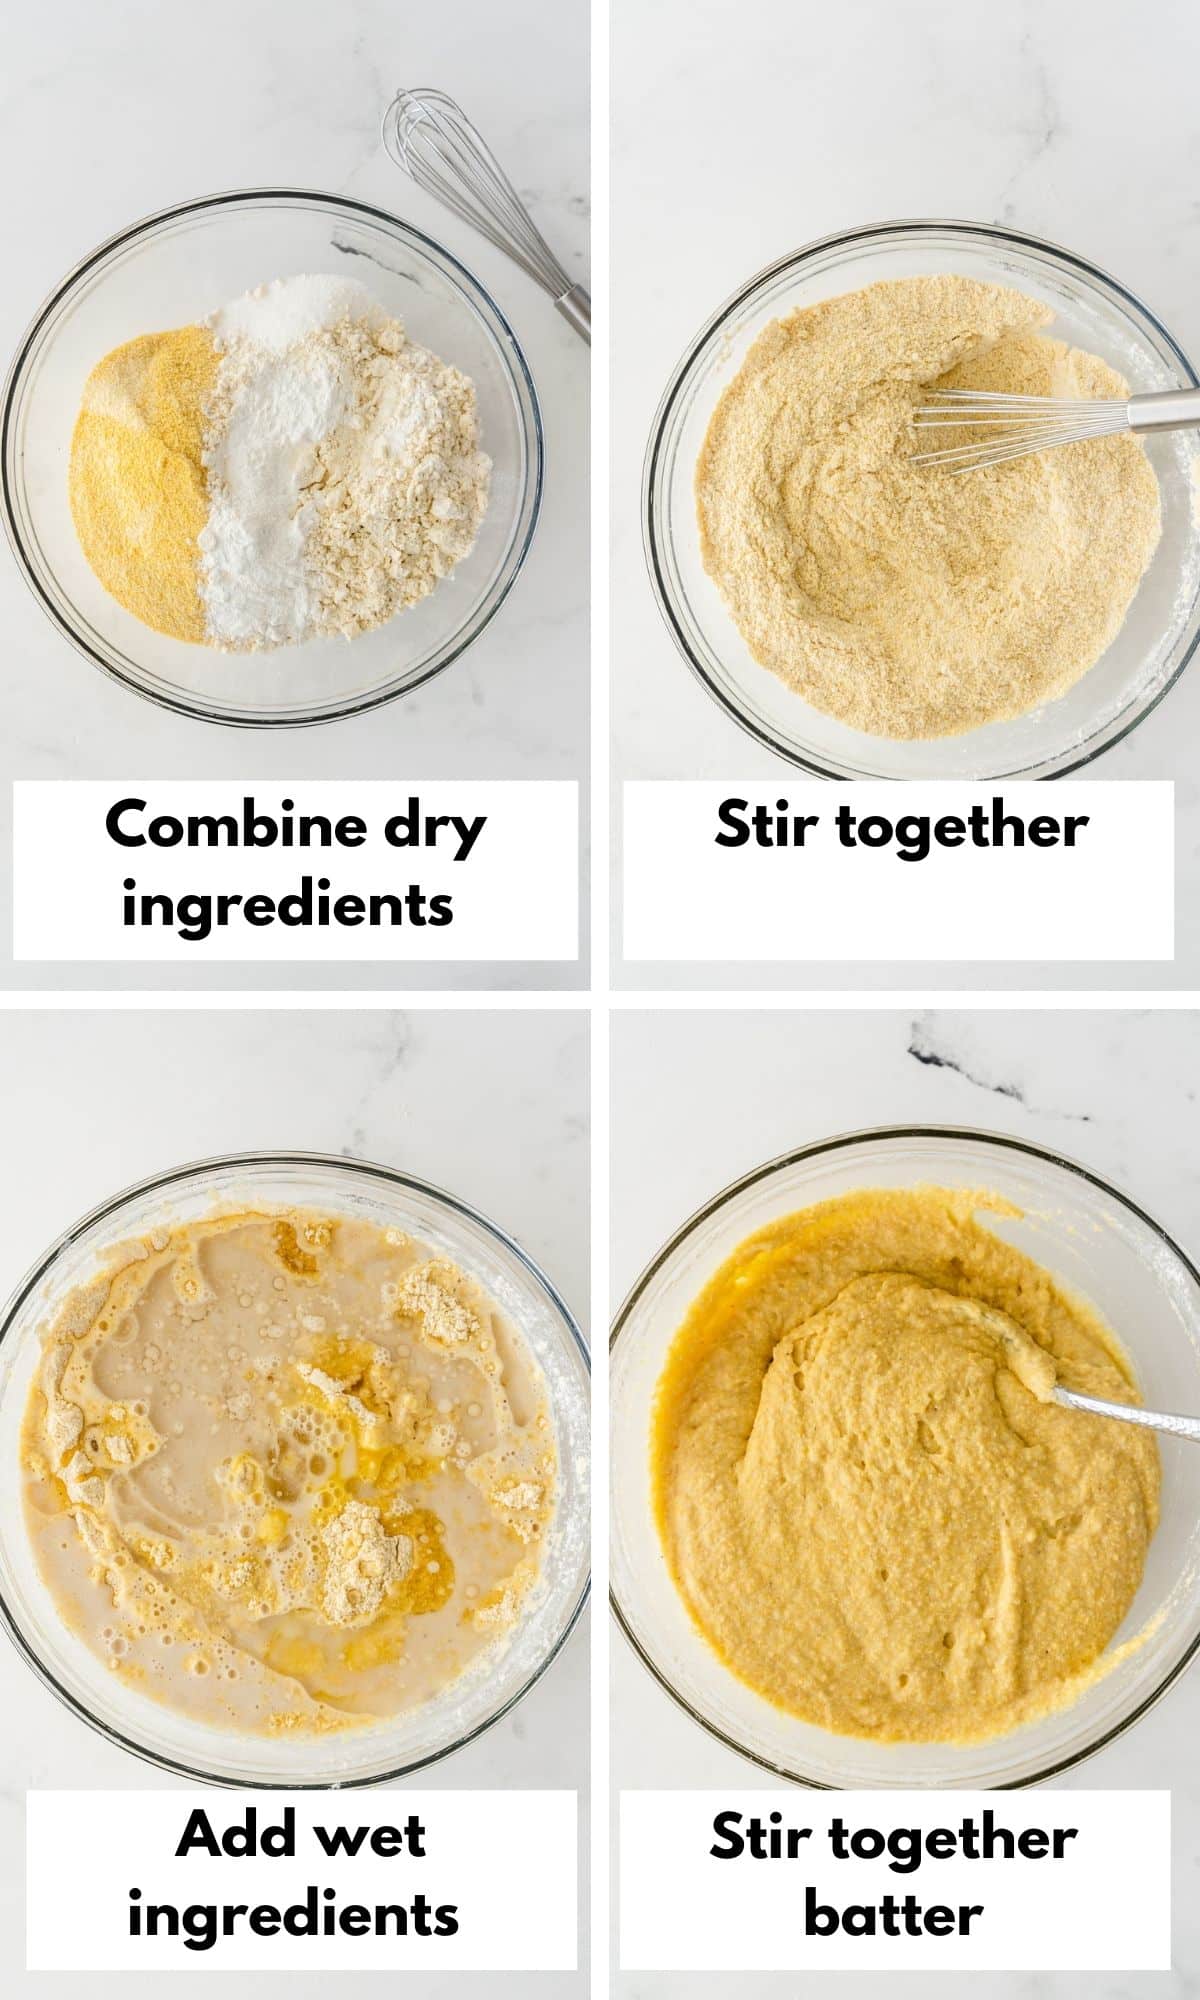 A picture of the dry ingredients with the wet ingredients then added to it to make the batter.